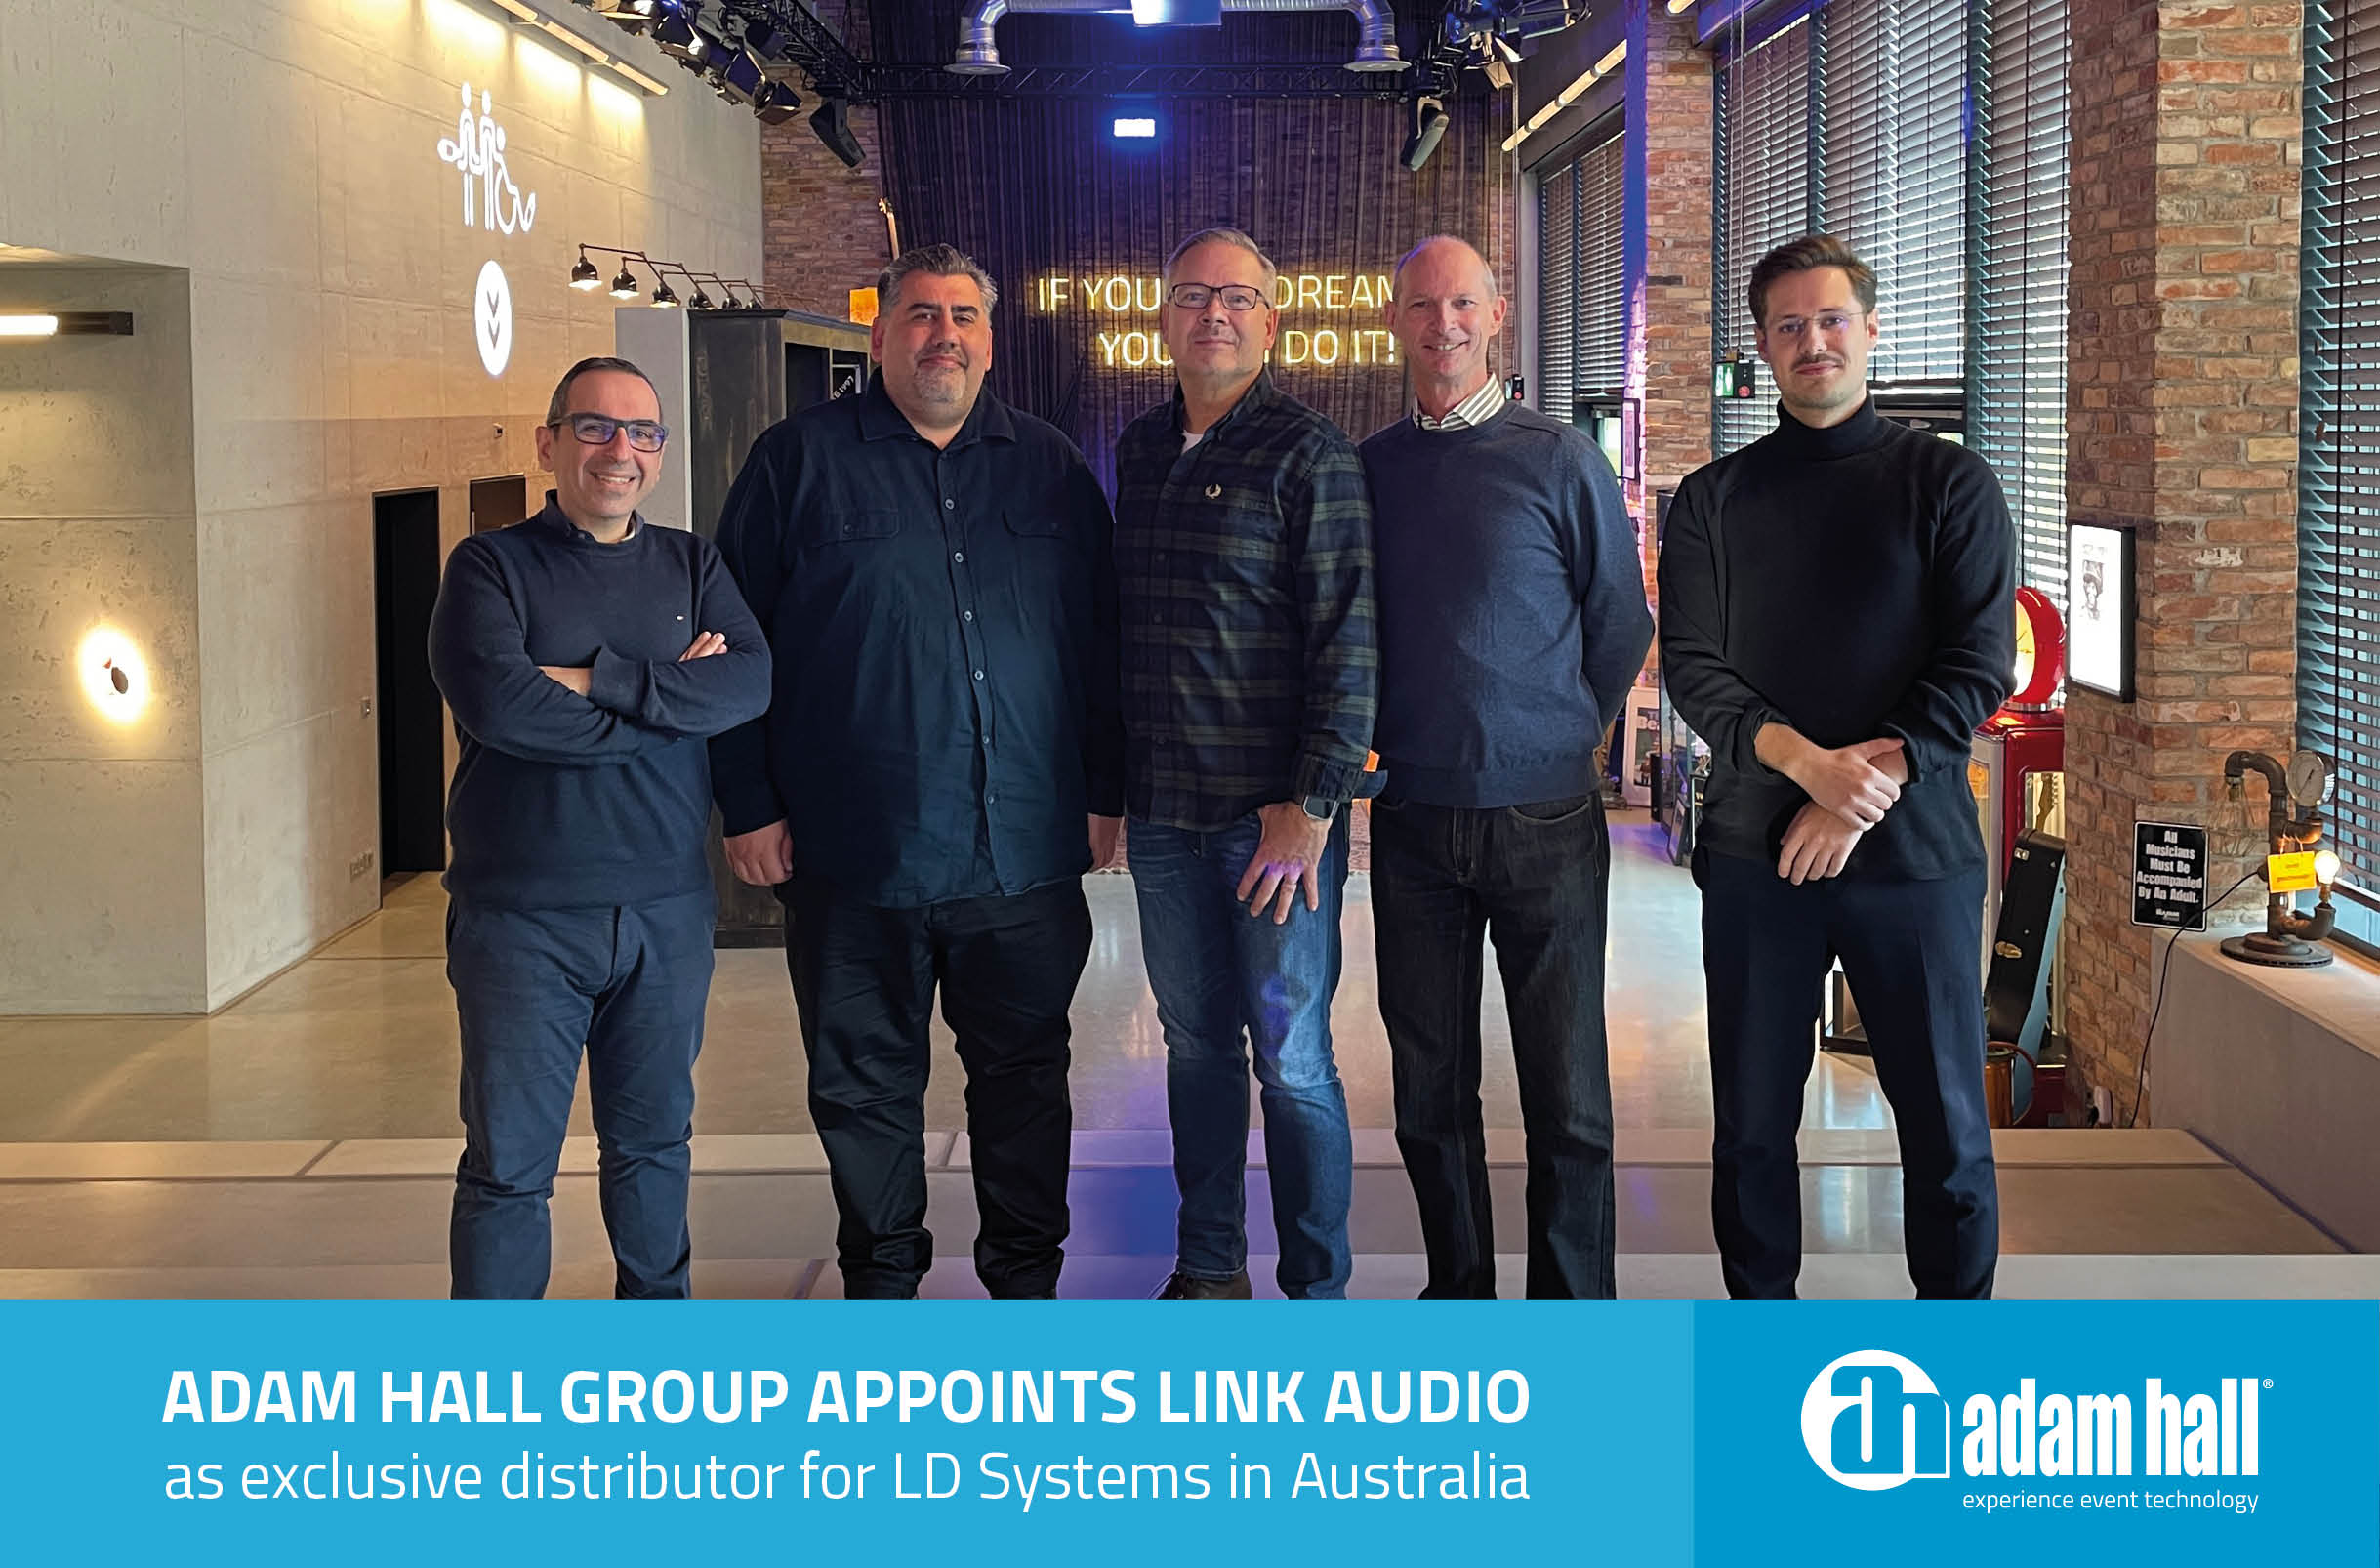 Adam Hall Group appoints Link Audio as exclusive LD Systems distributor in Australia